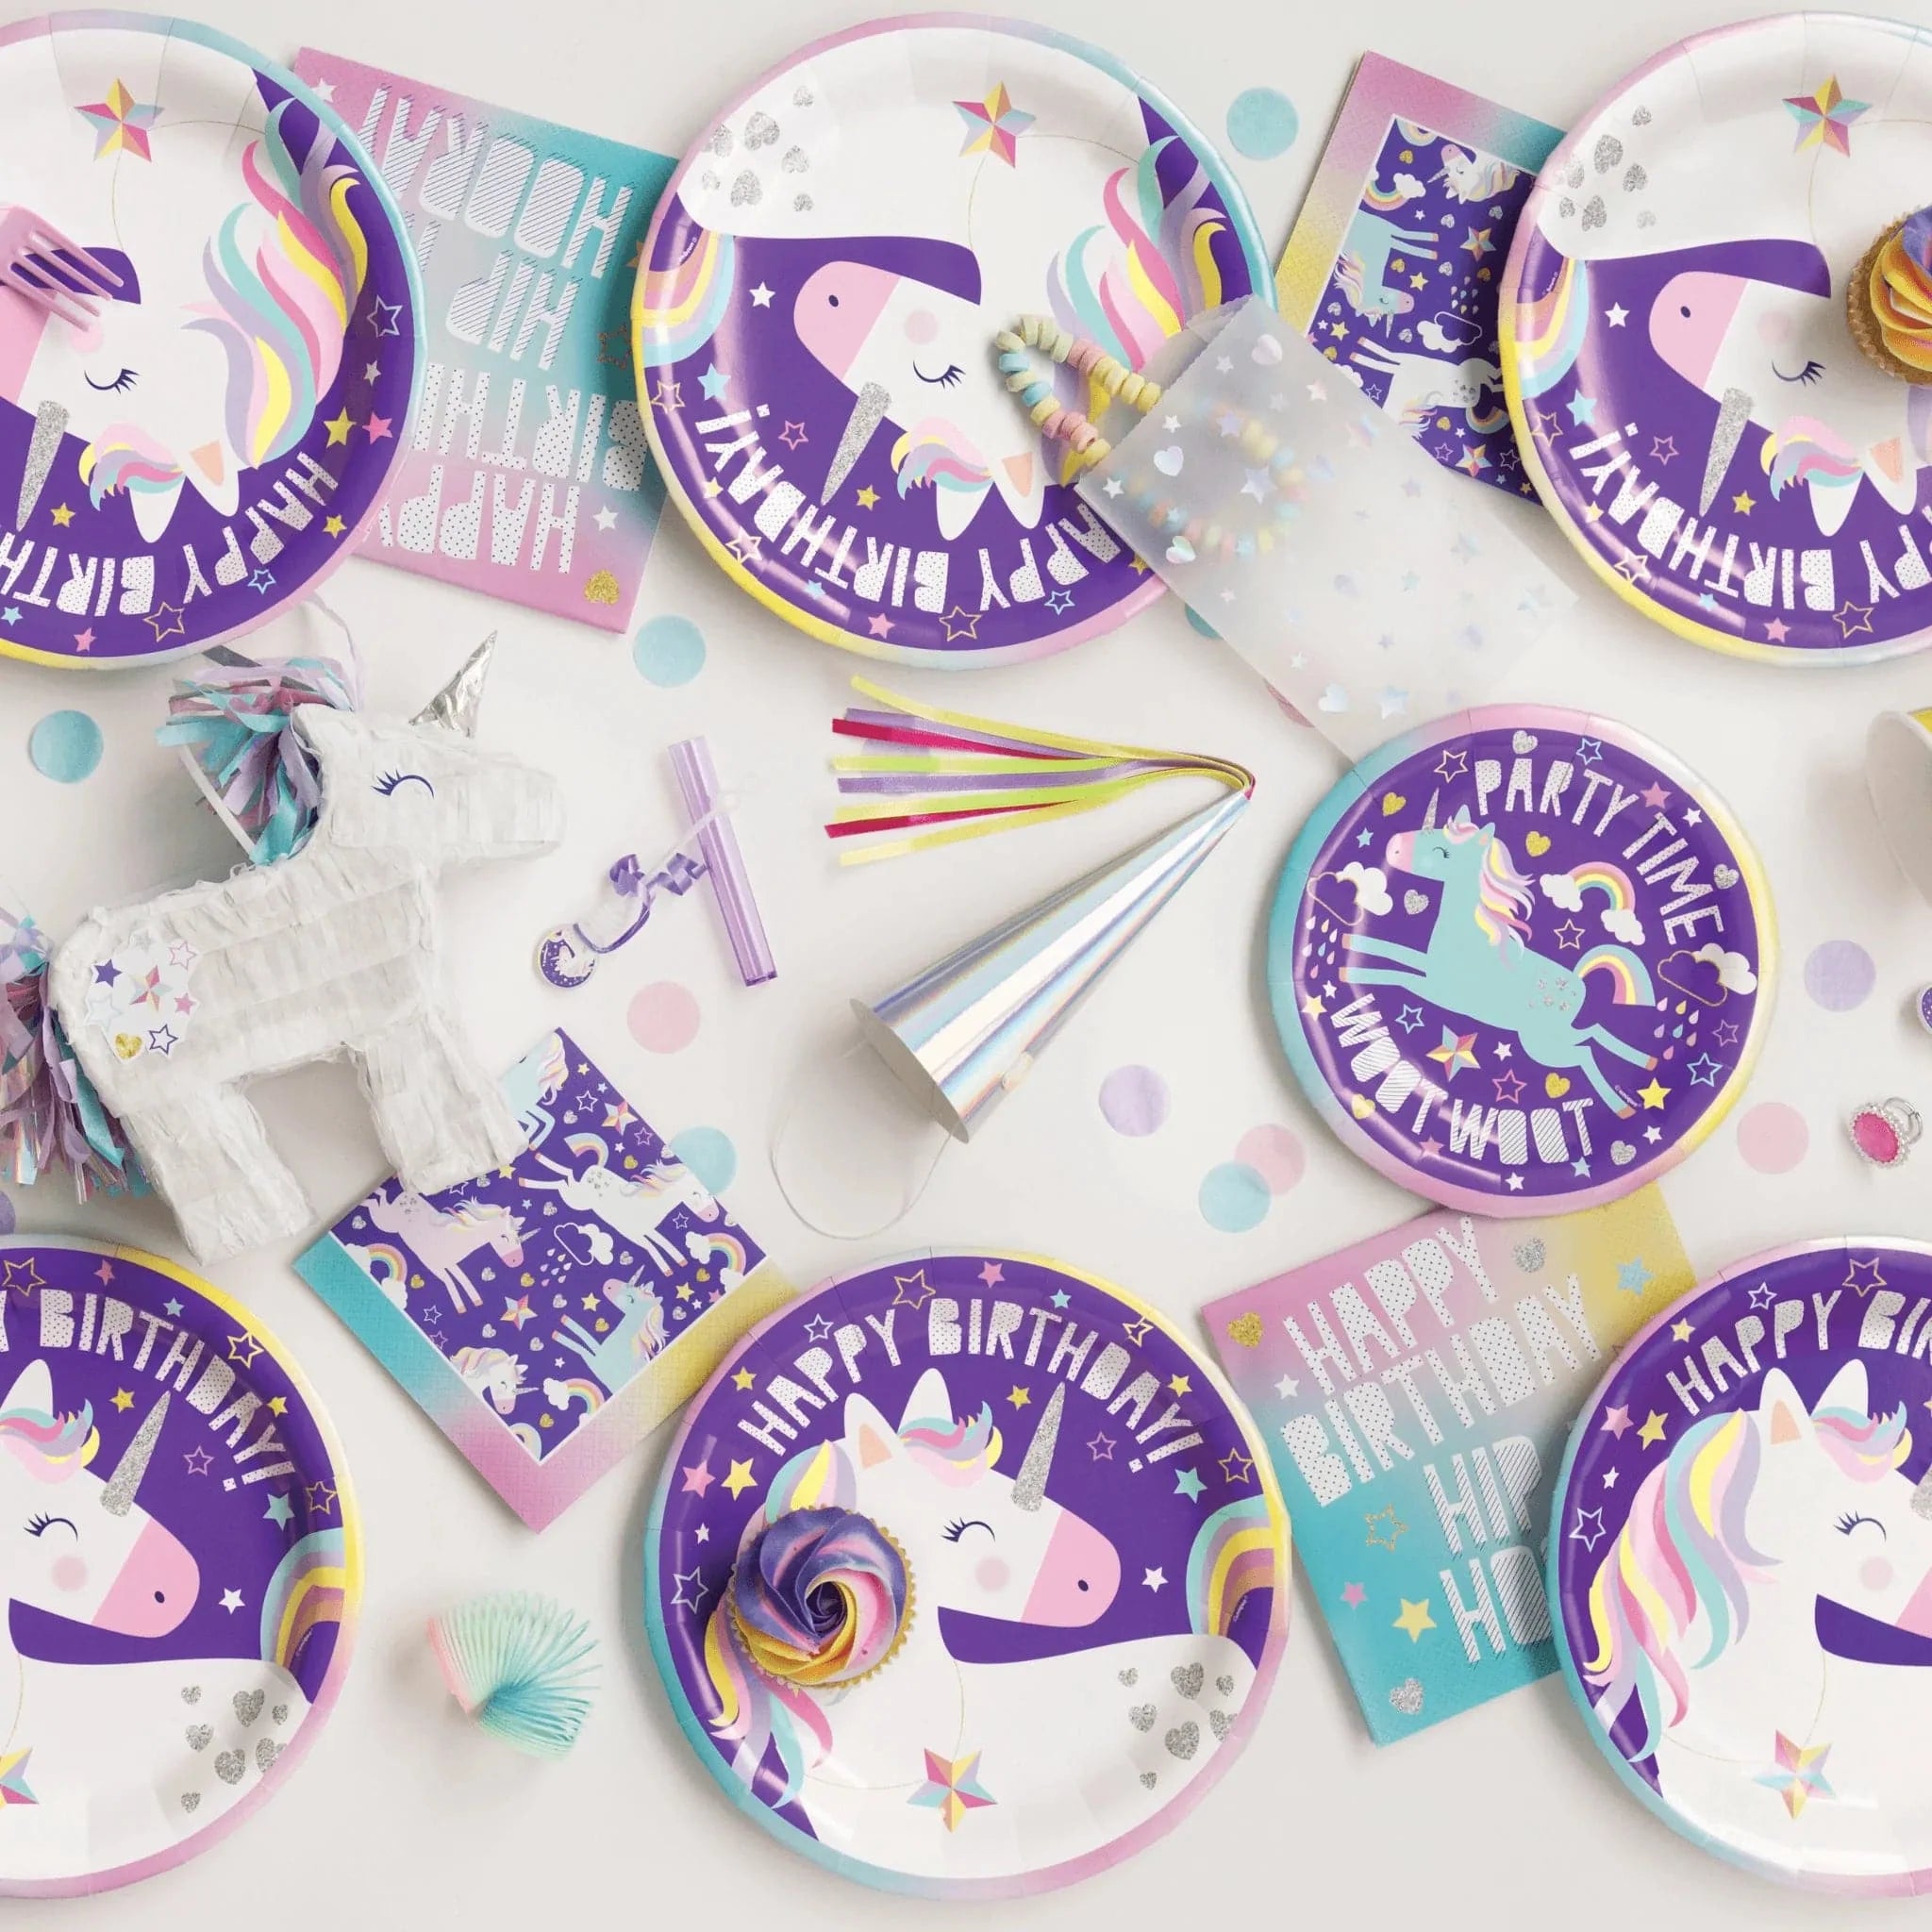 Unicorn Table Cover - Kids Party Craft